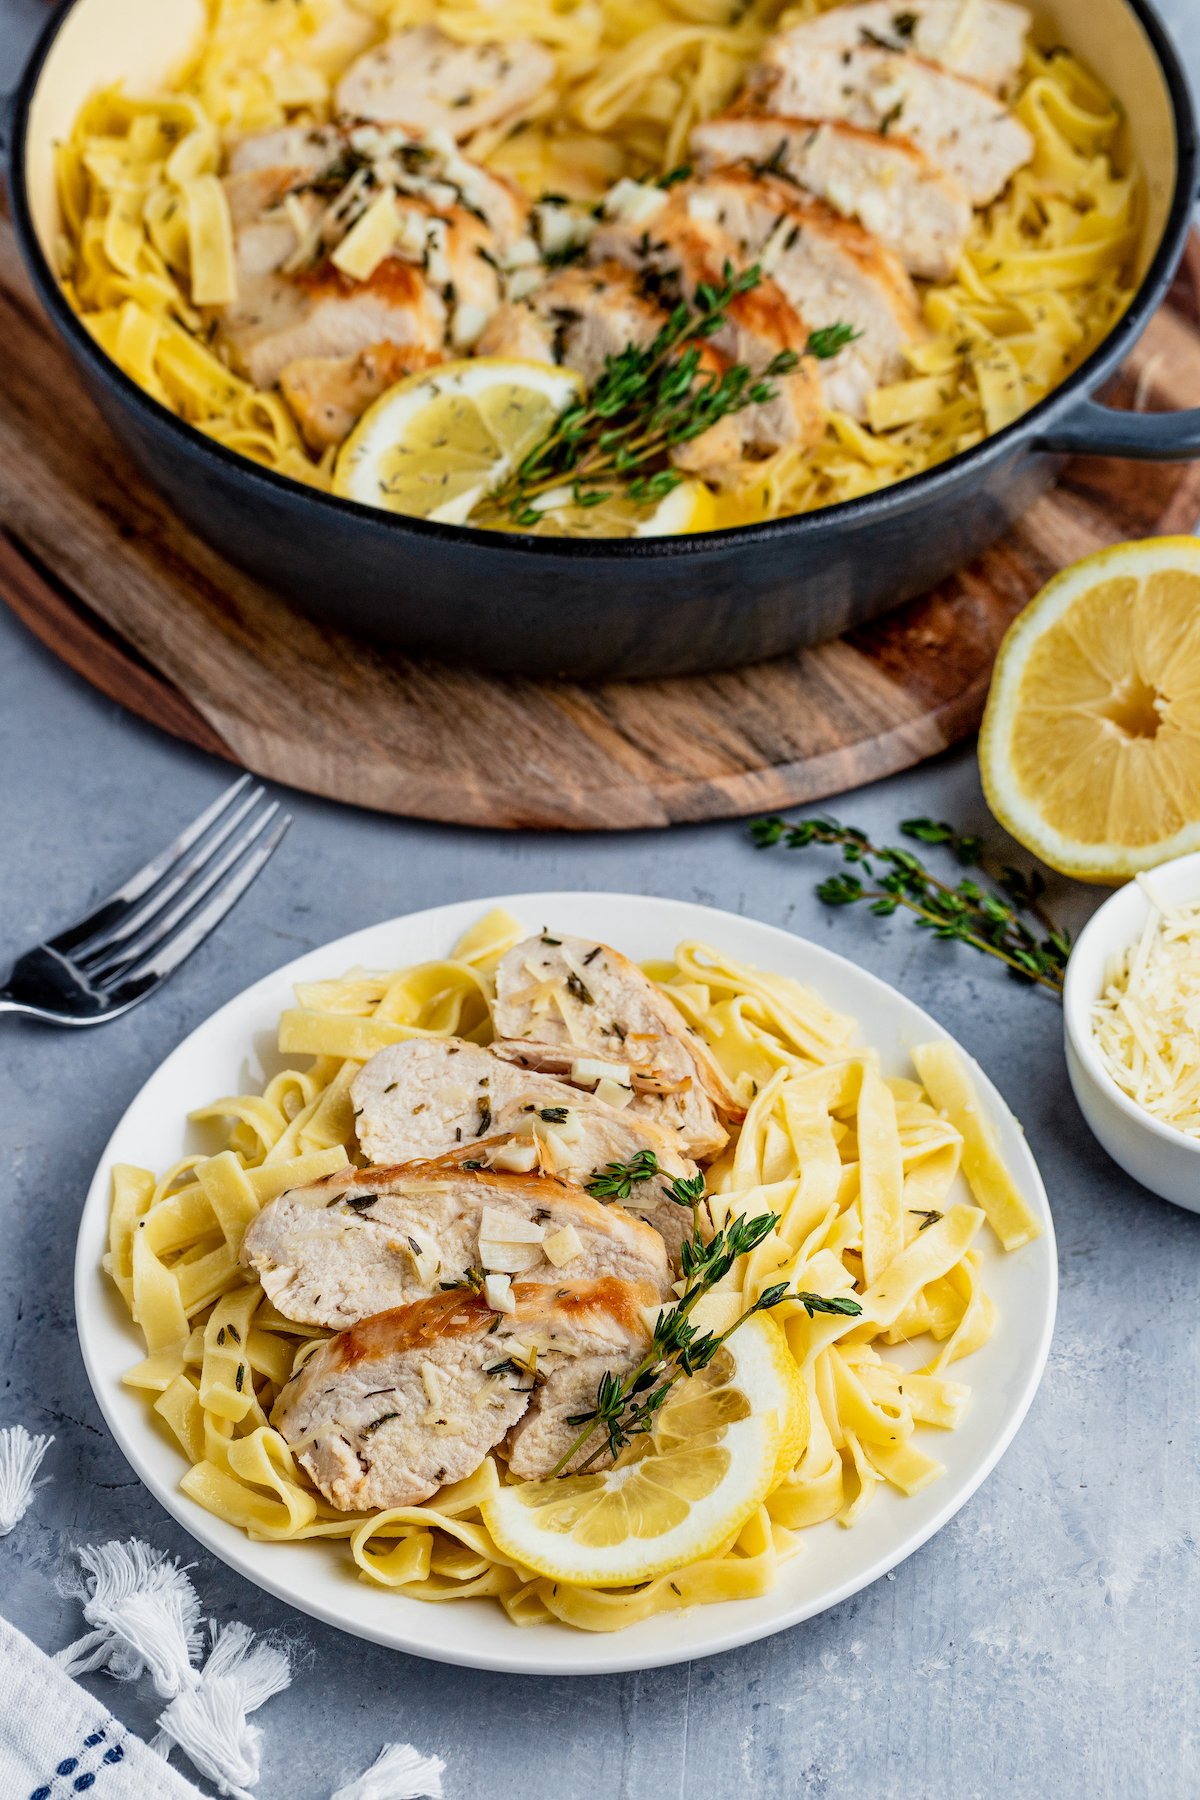 Lemon thyme chicken and pasta served on a plate next to a large bowl of chicken pasta.